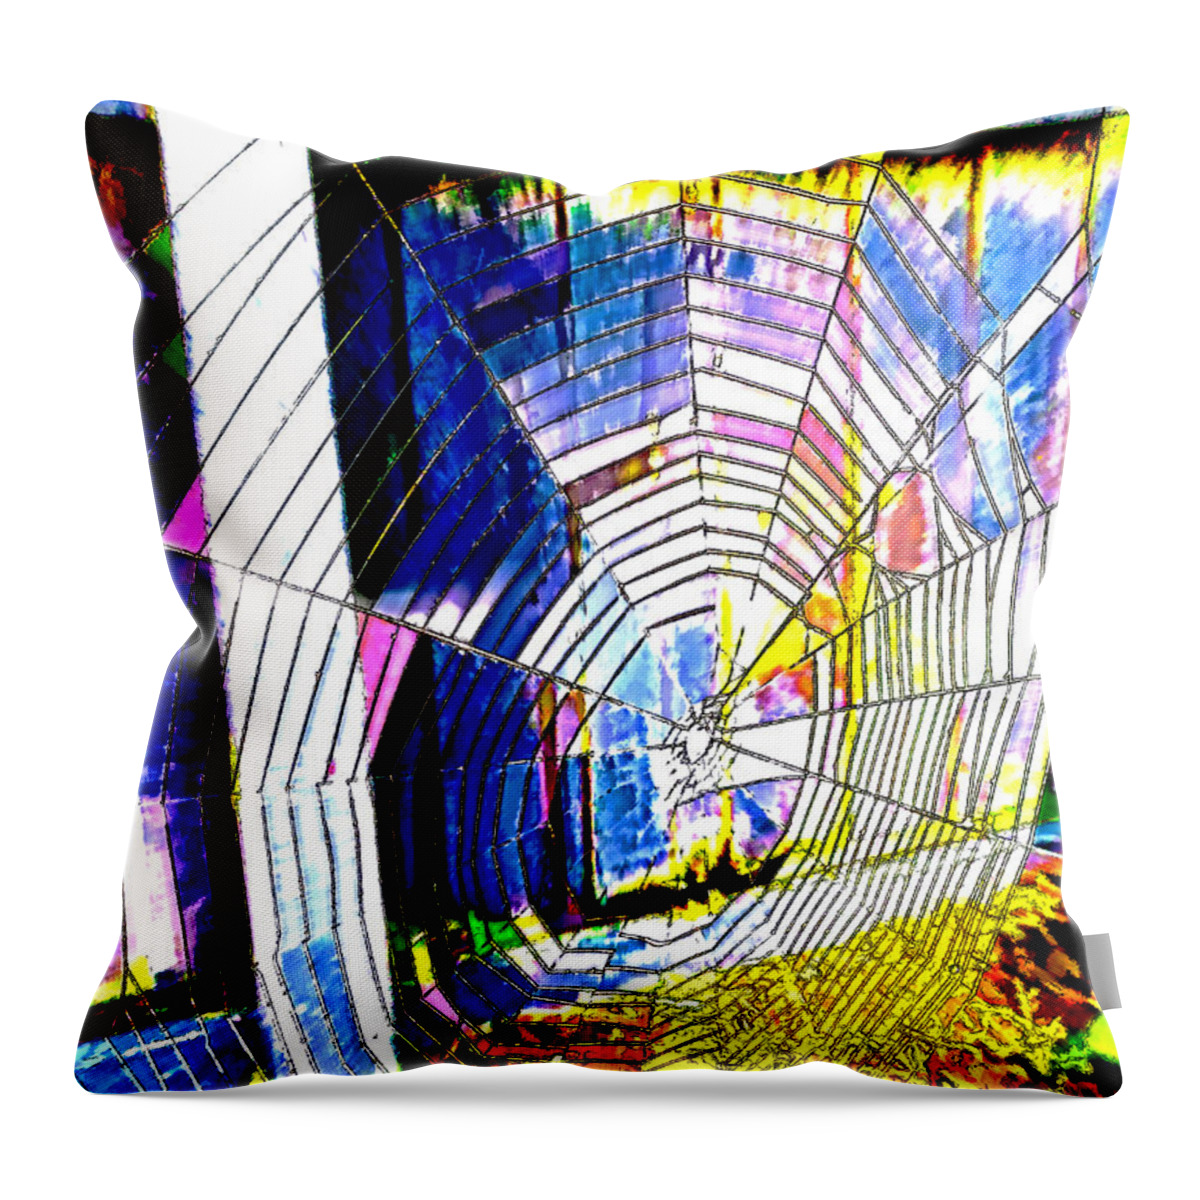 Web Throw Pillow featuring the digital art The Refracted Cobweb by Steve Taylor